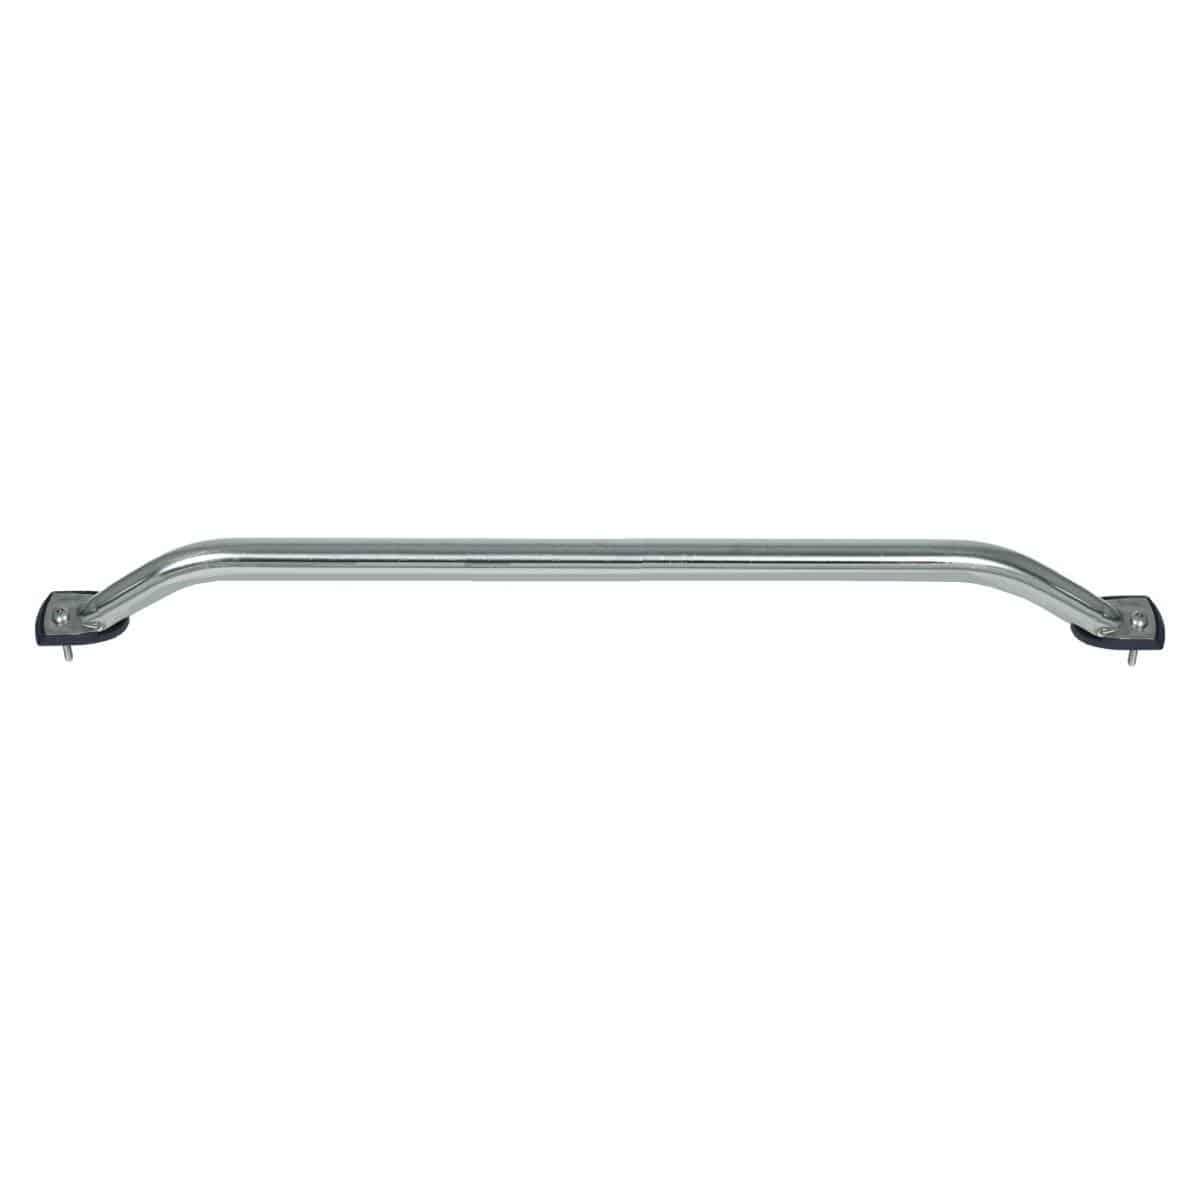 Boat Handrails 25MM Stainless Steel